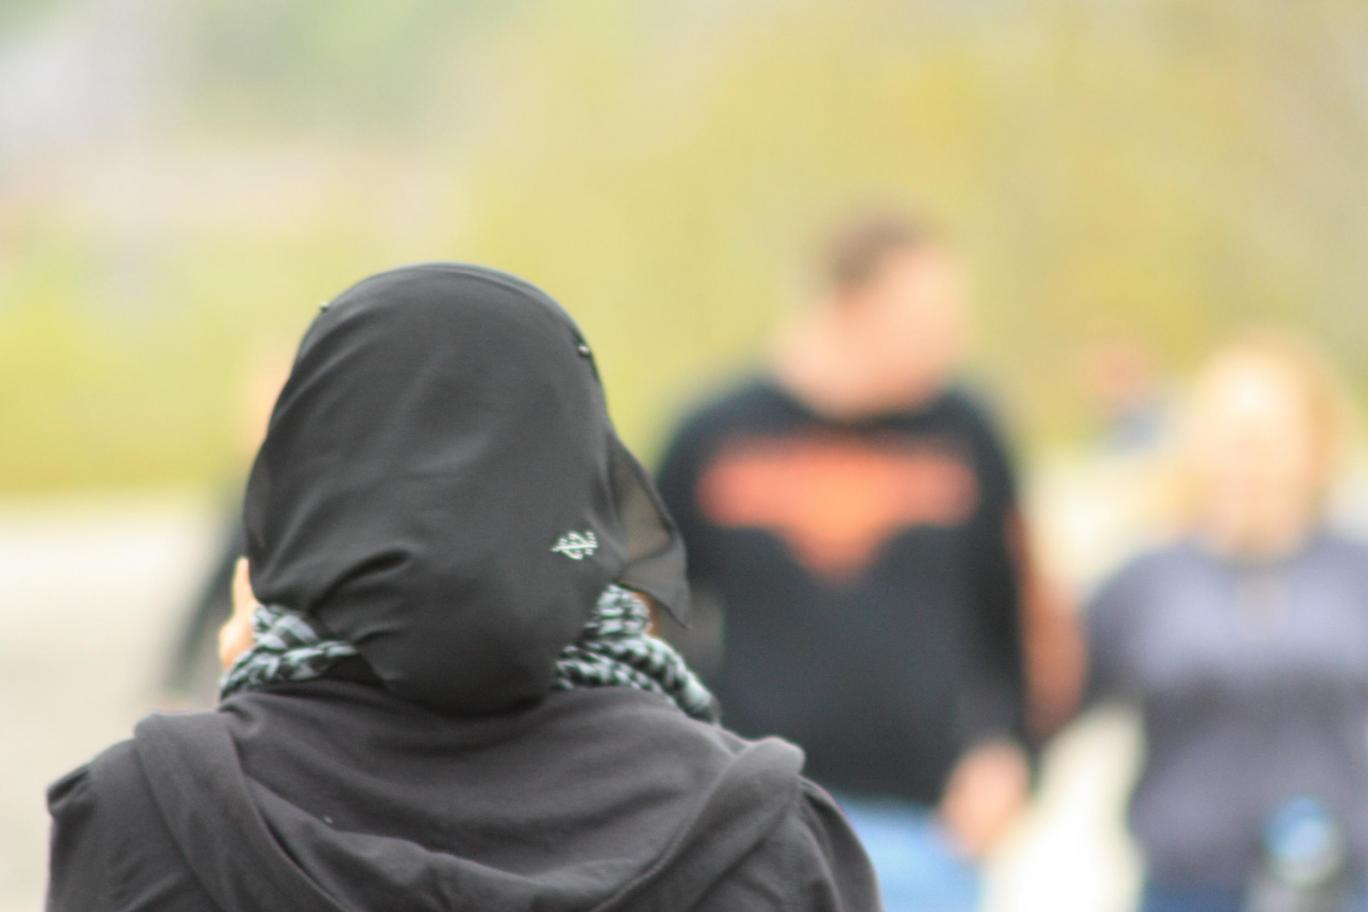 Muslim woman offered job on condition that she remove her hijab